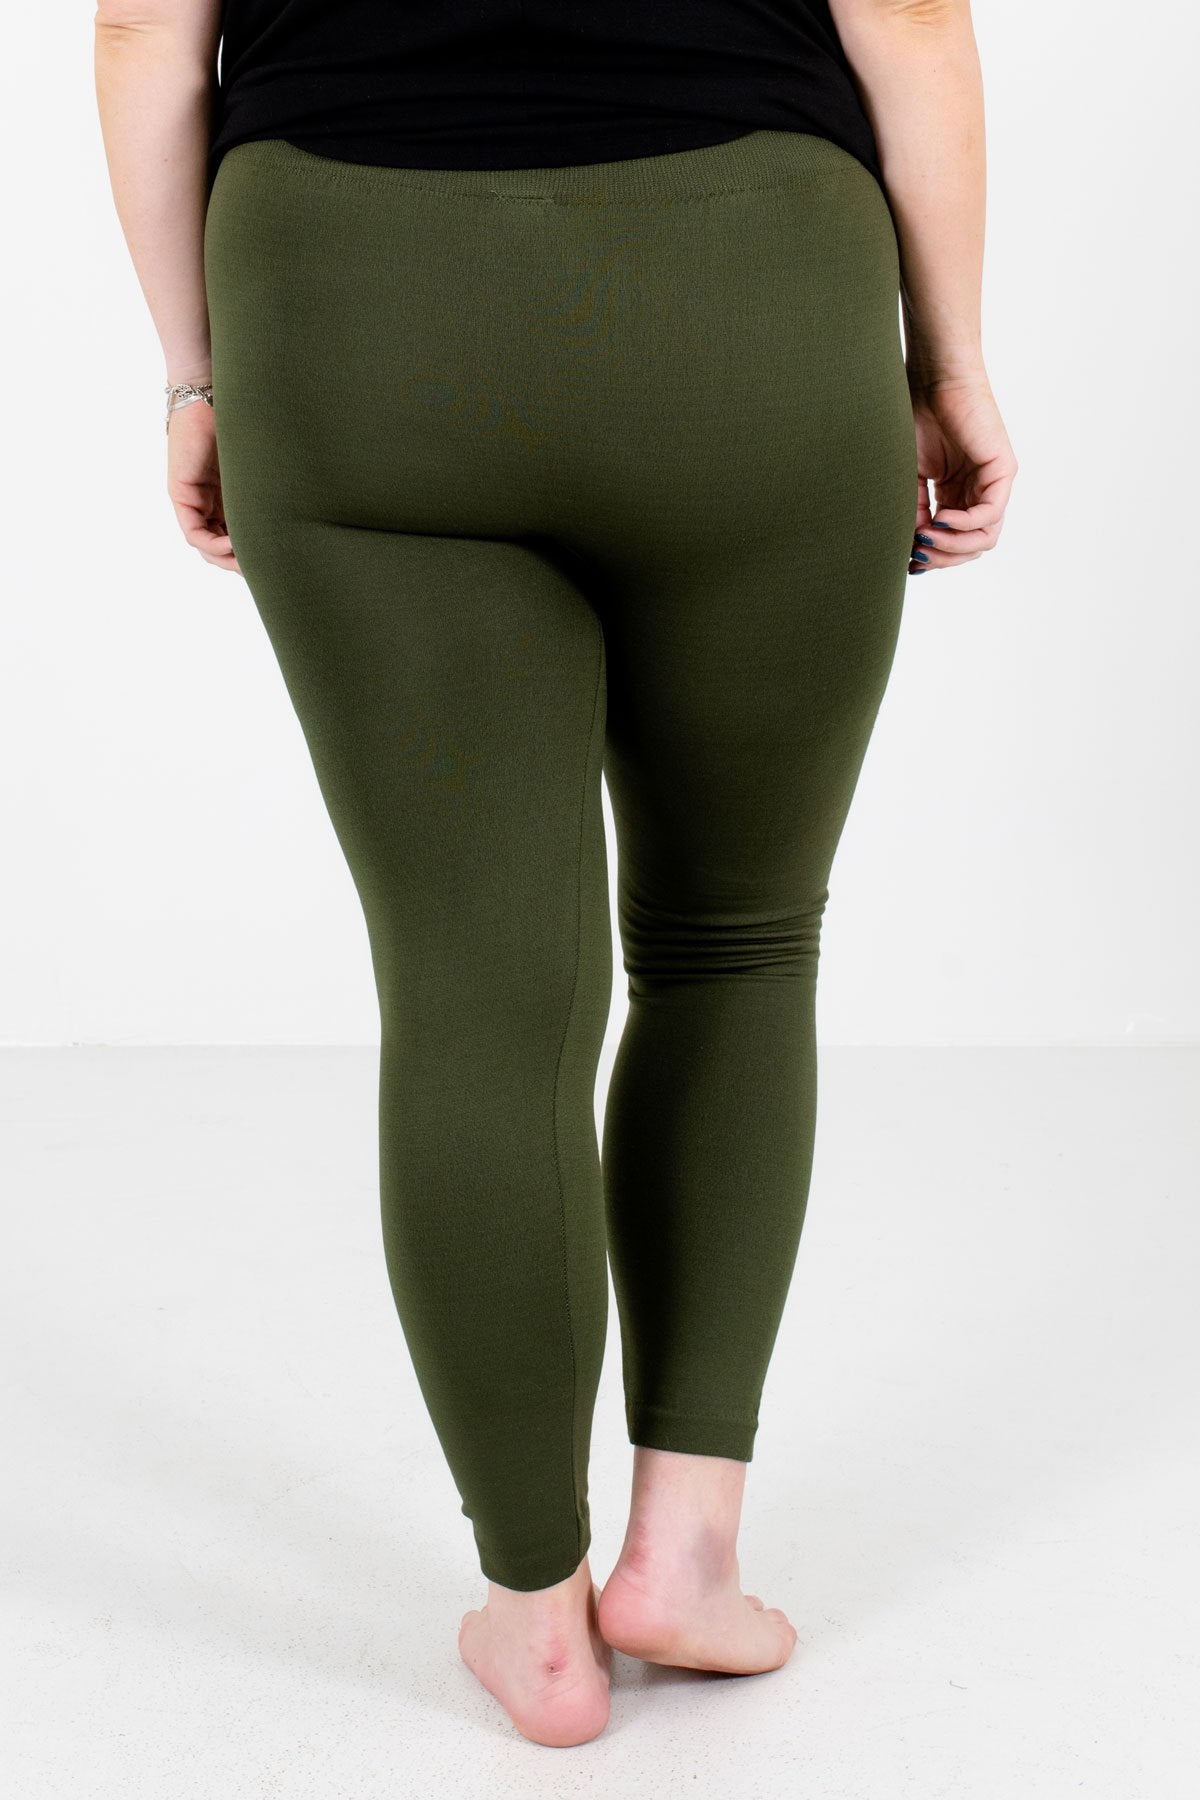 Olive Green Cute and Comfortable Boutique Leggings for Women